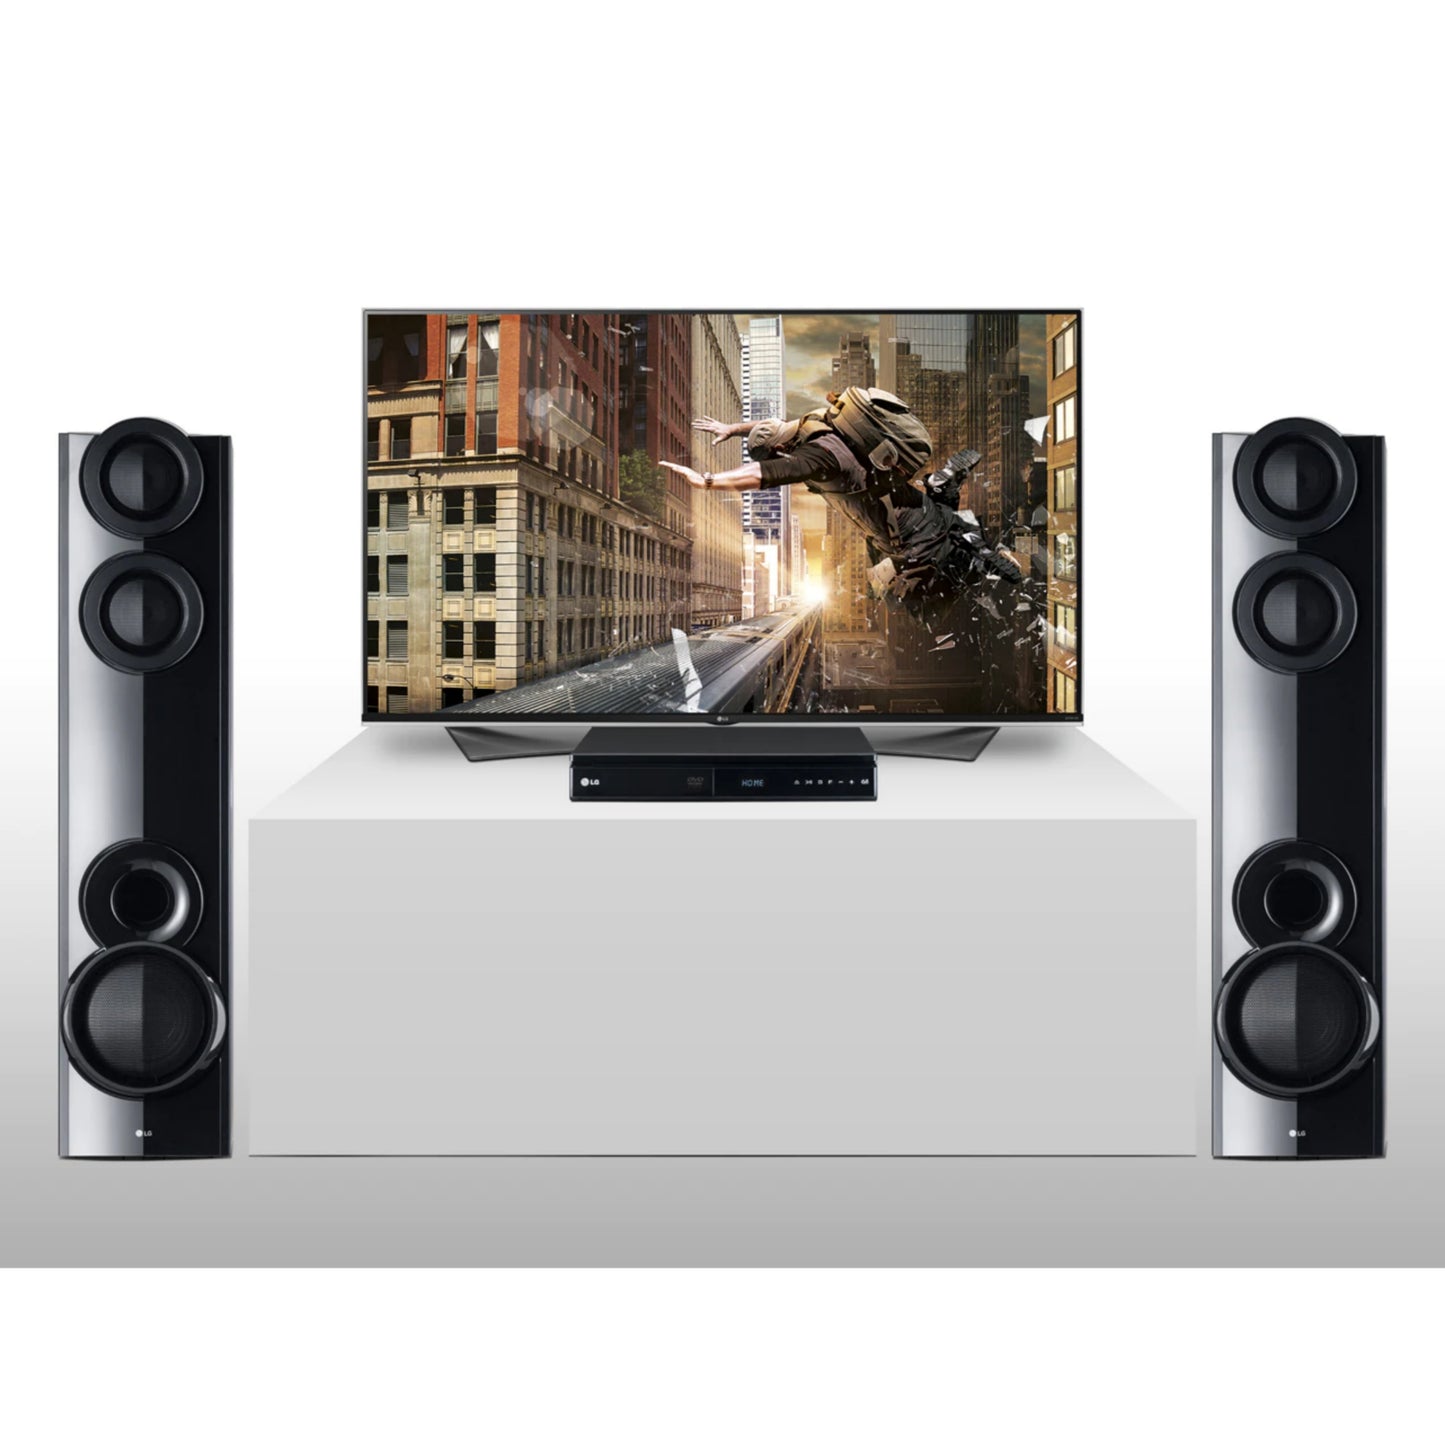 LG LHD675BG Bodyguard Home theater setting with a TV